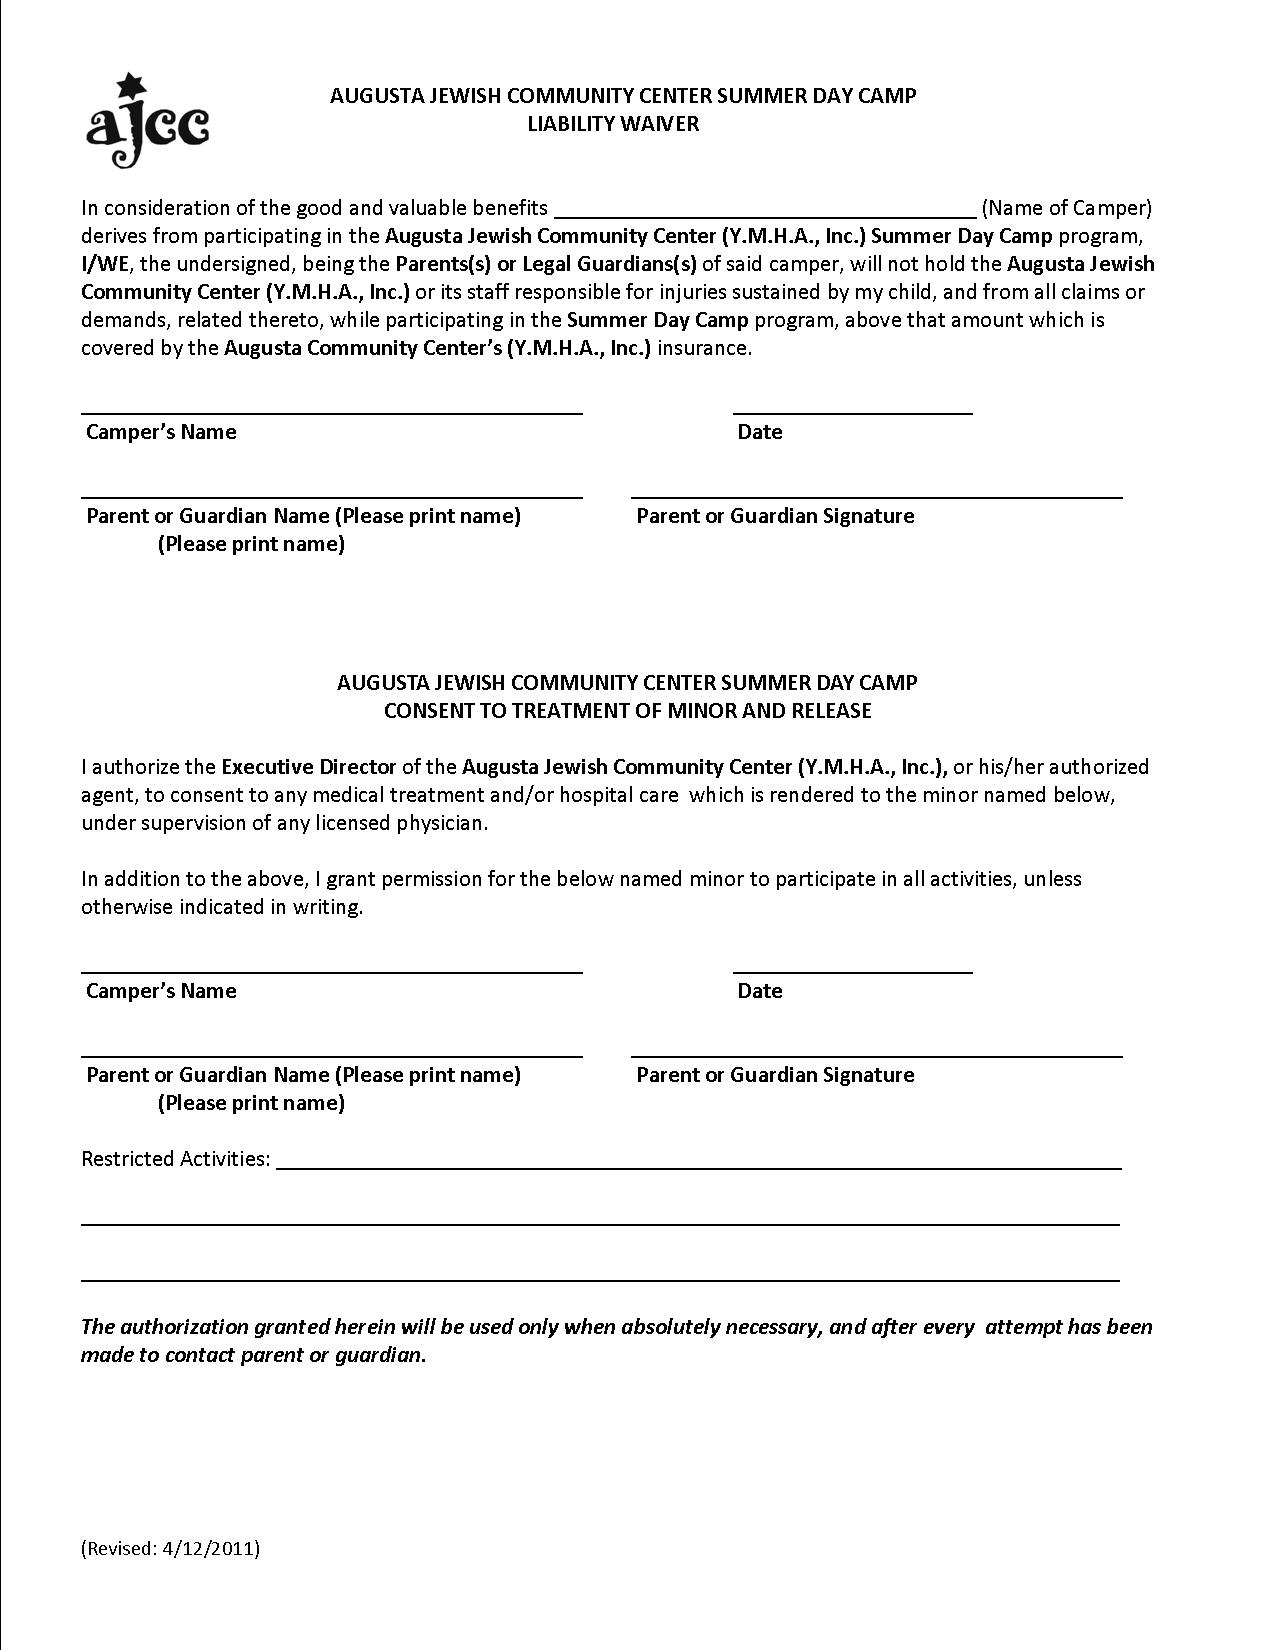 liability-waiver-form-sample-free-printable-documents